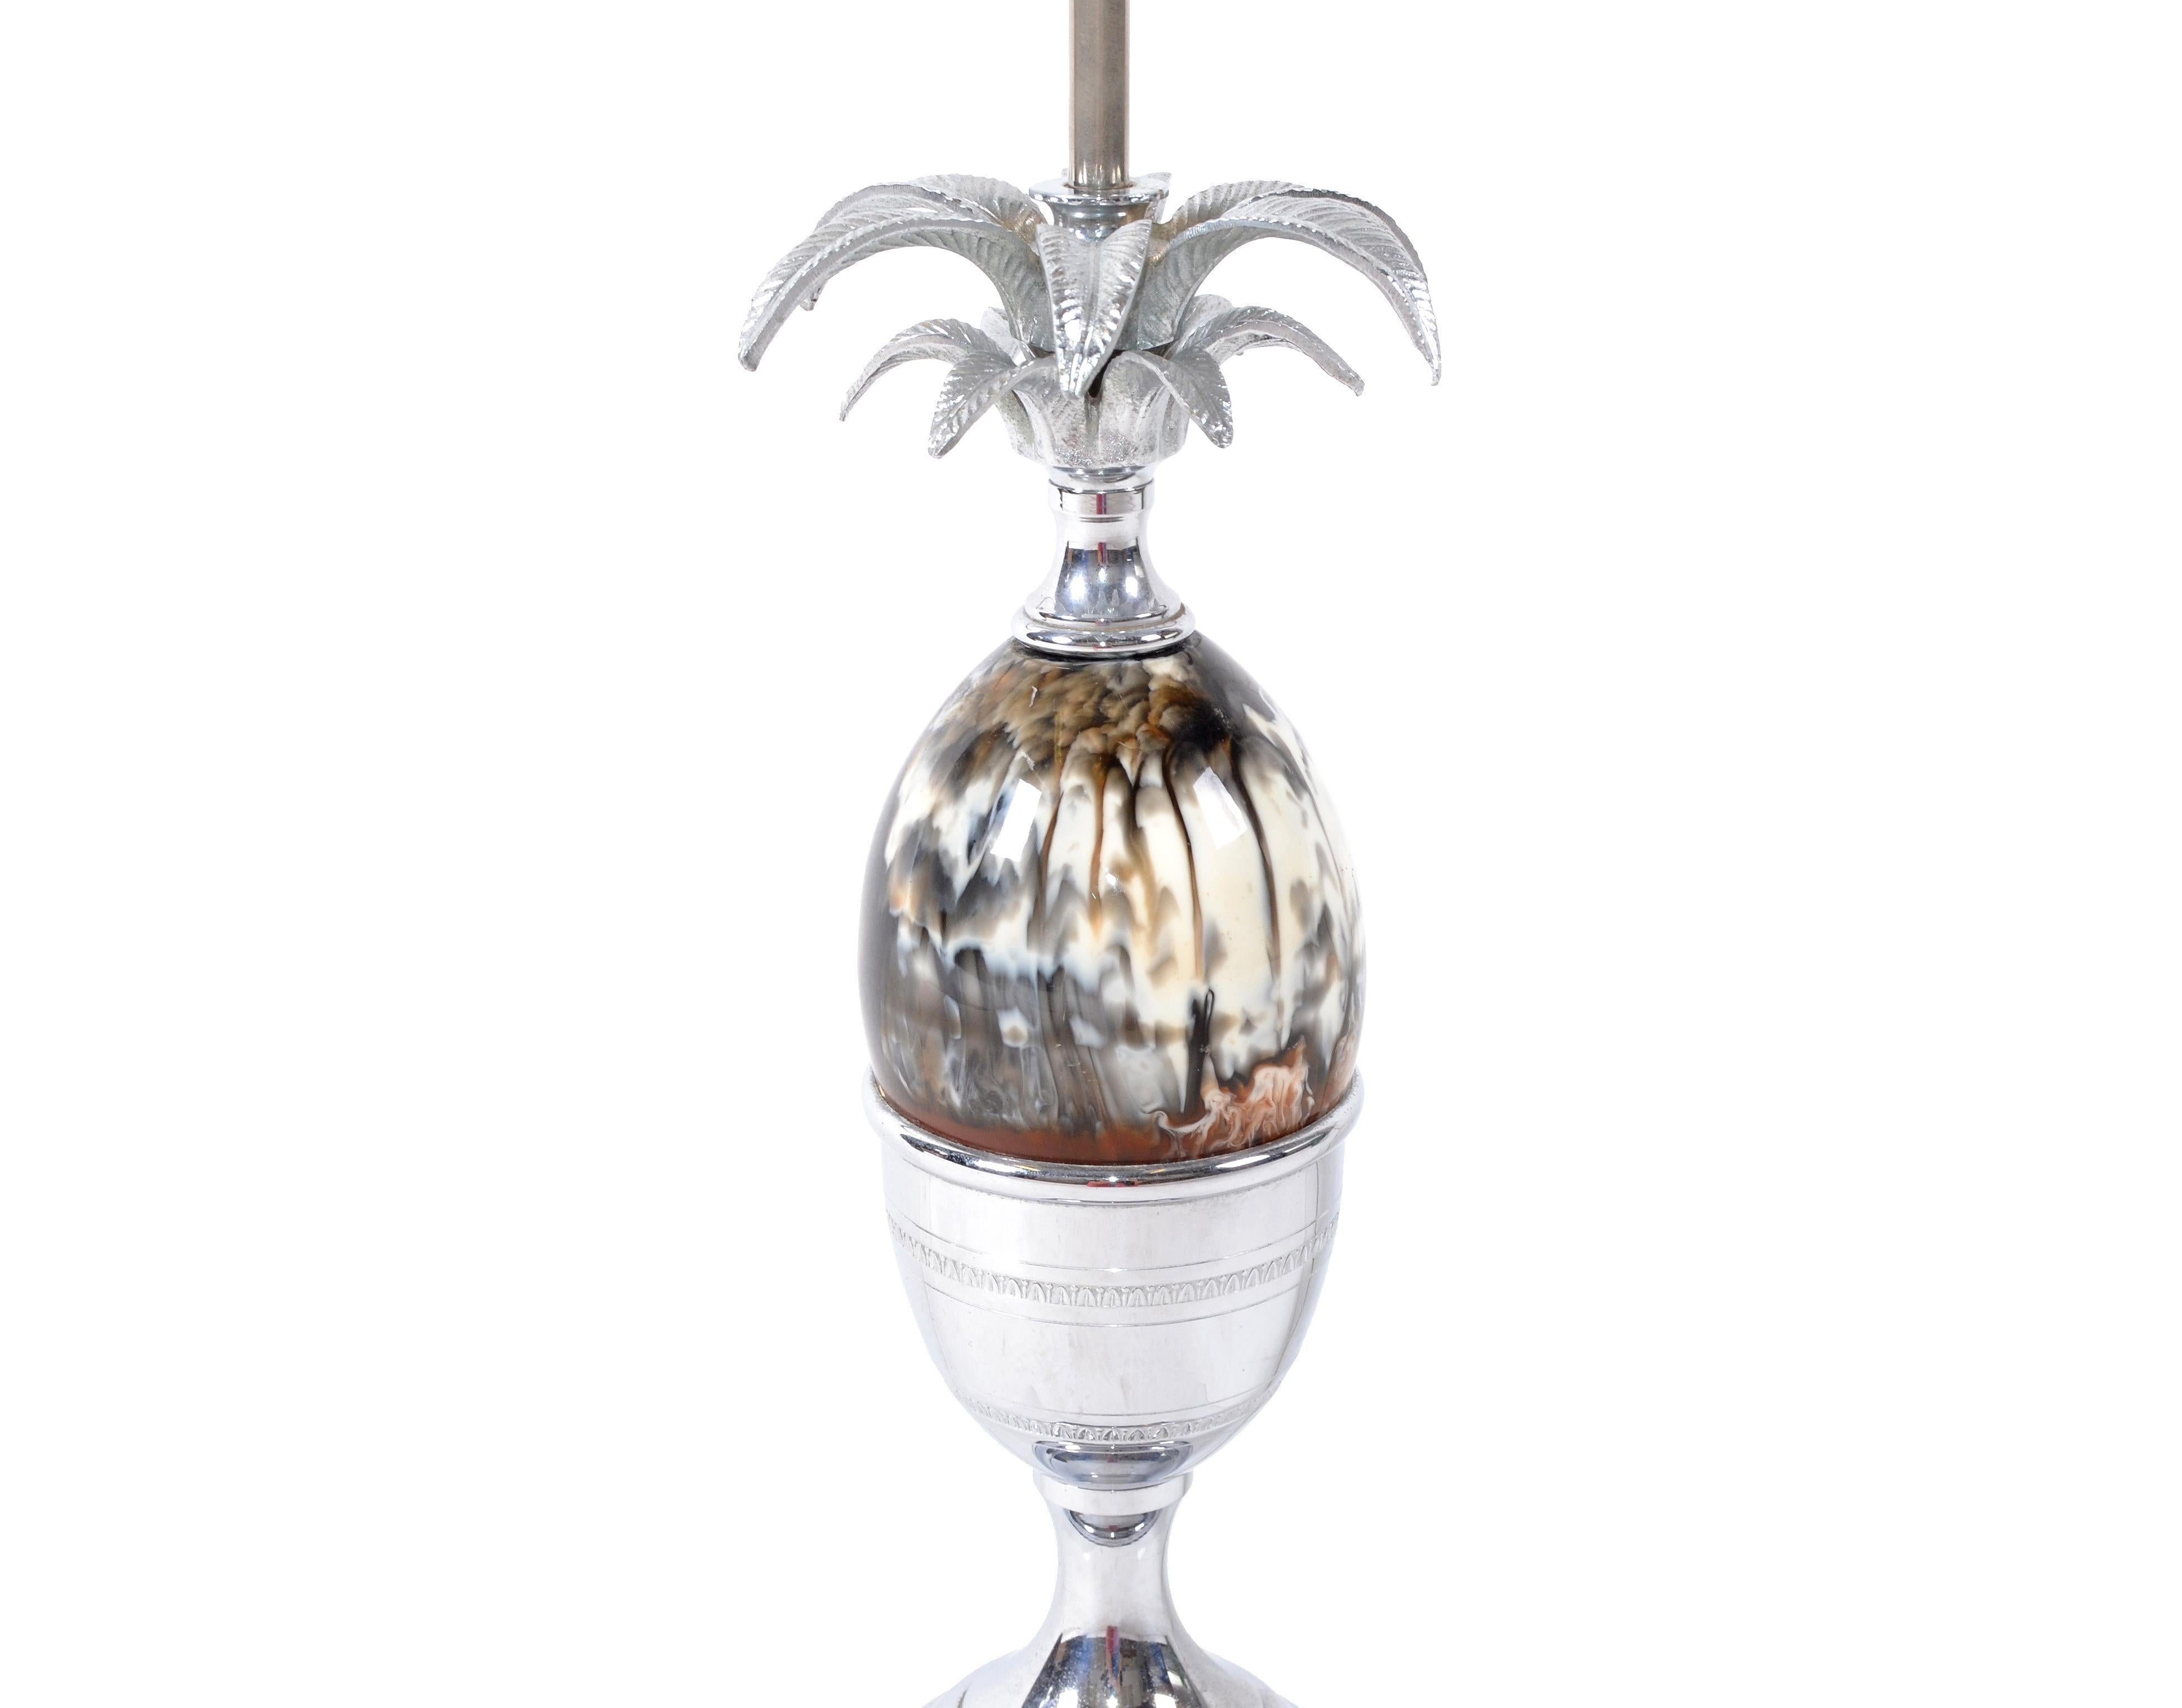 Maison Charles French Art Deco Brown Resin Acorn Nickel-Plated Table Lamp, 1950s For Sale 1